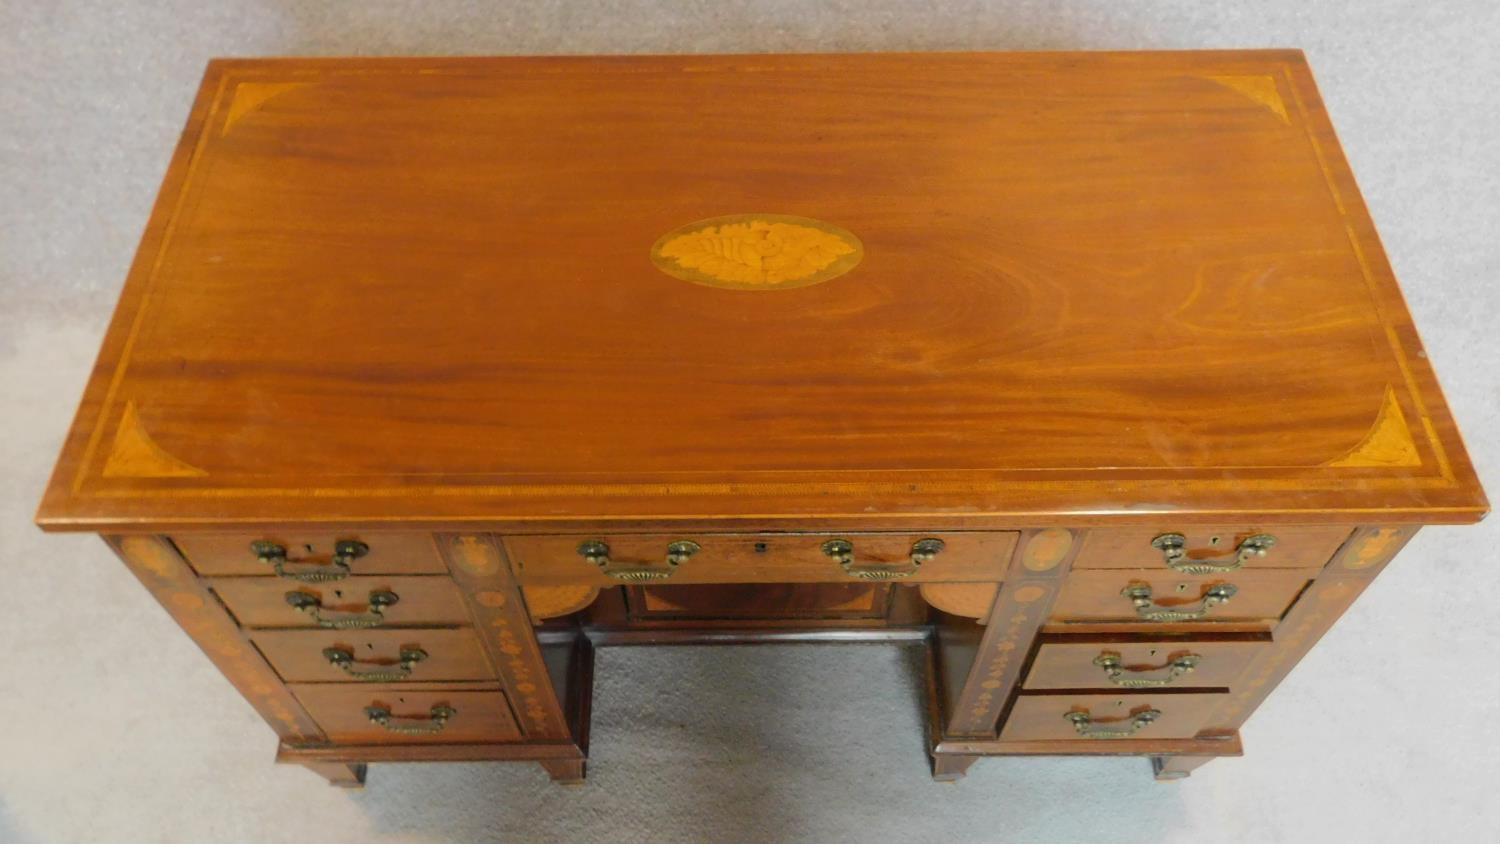 An Edwardian mahogany and satinwood inlaid kneehole desk with allover conch shell, swag and urn - Image 4 of 8